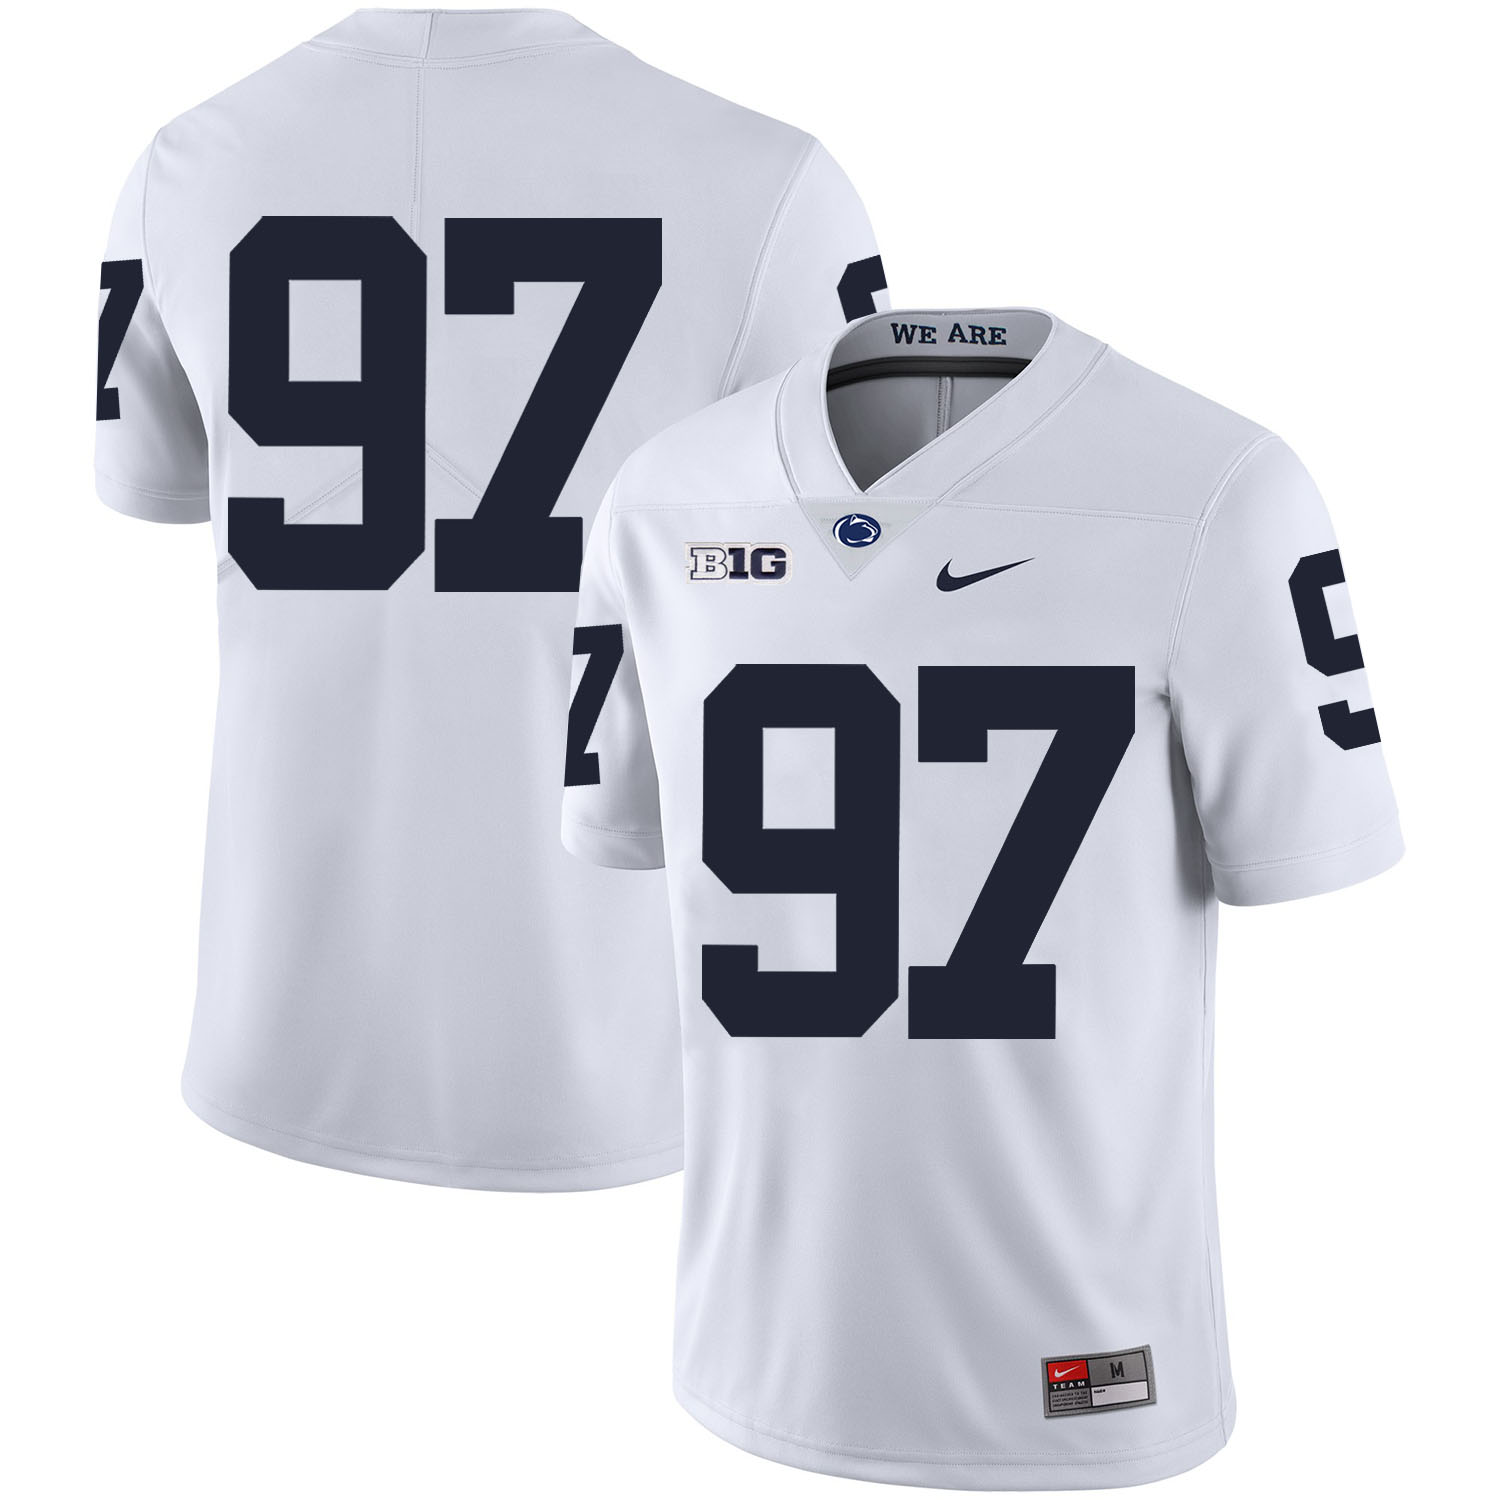 Penn State Nittany Lions 97 Sam Ficken White Nike College Football Jersey